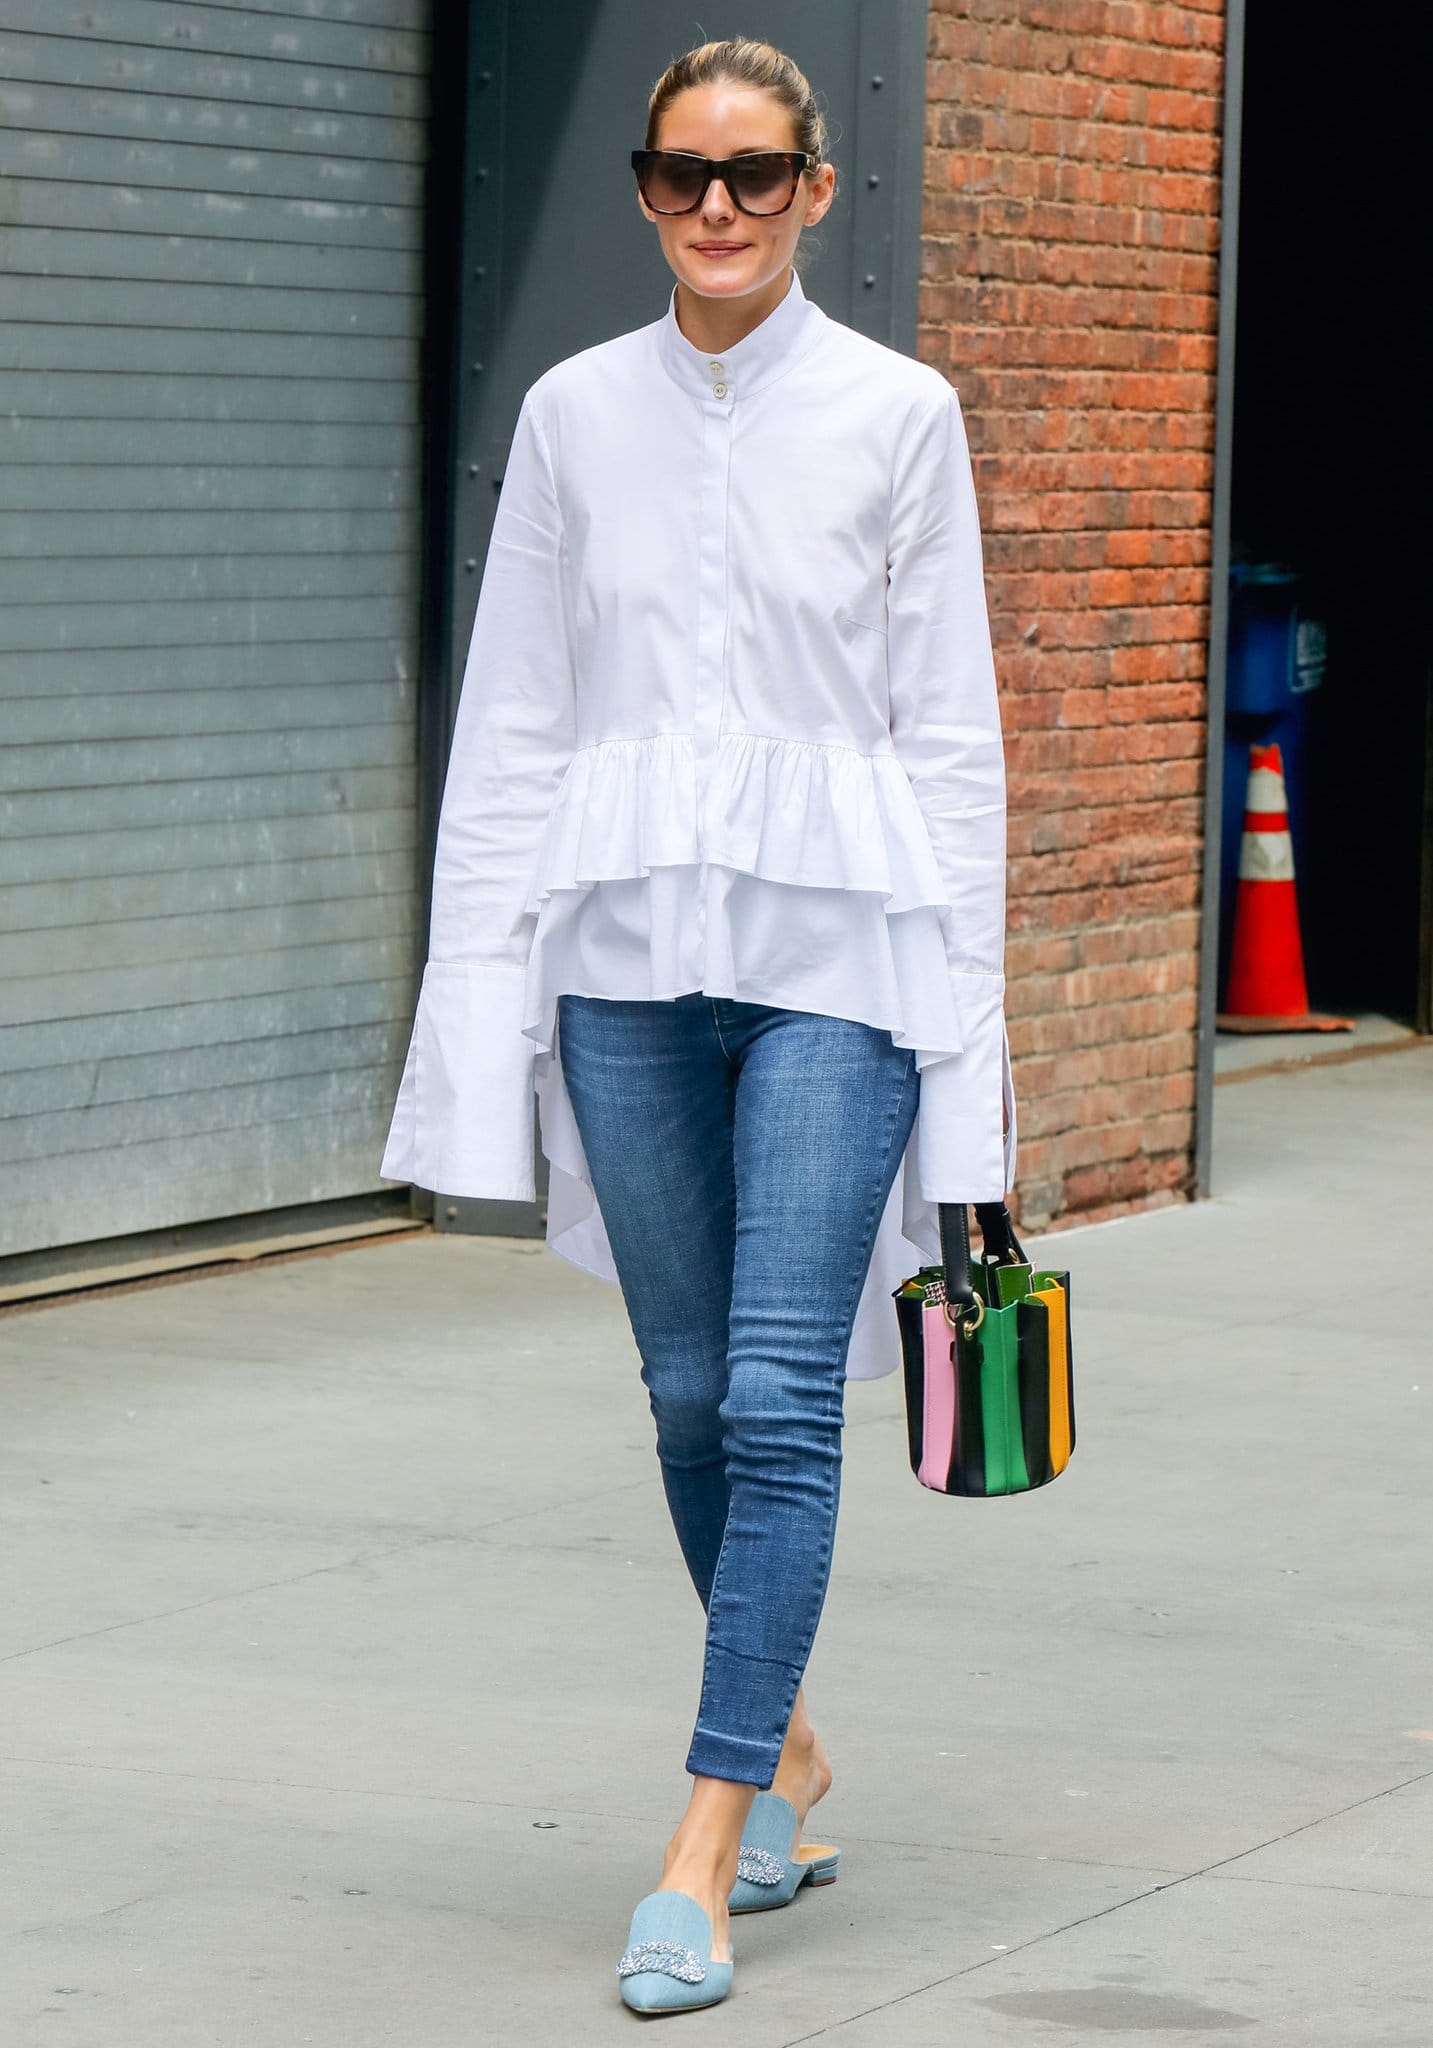 Olivia Palermo steps out in New York City in a Caroline Constas ruffled shirt and skinny jeans